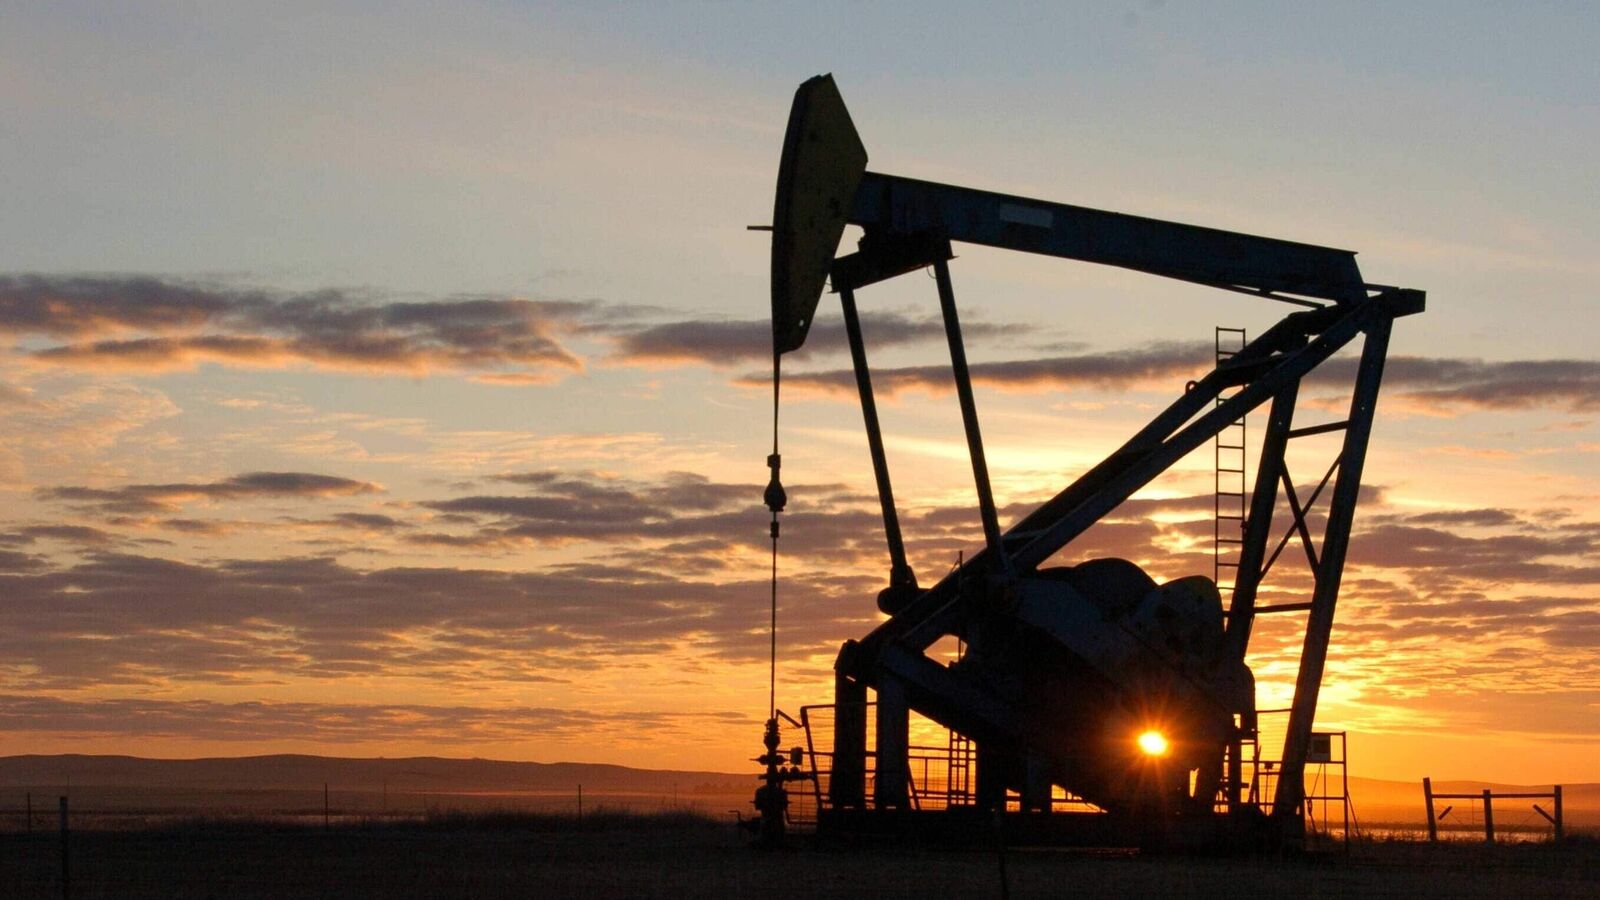 Oil prices continue to gain amid worries about supply disruptions; brent crude at $89.76/bbl